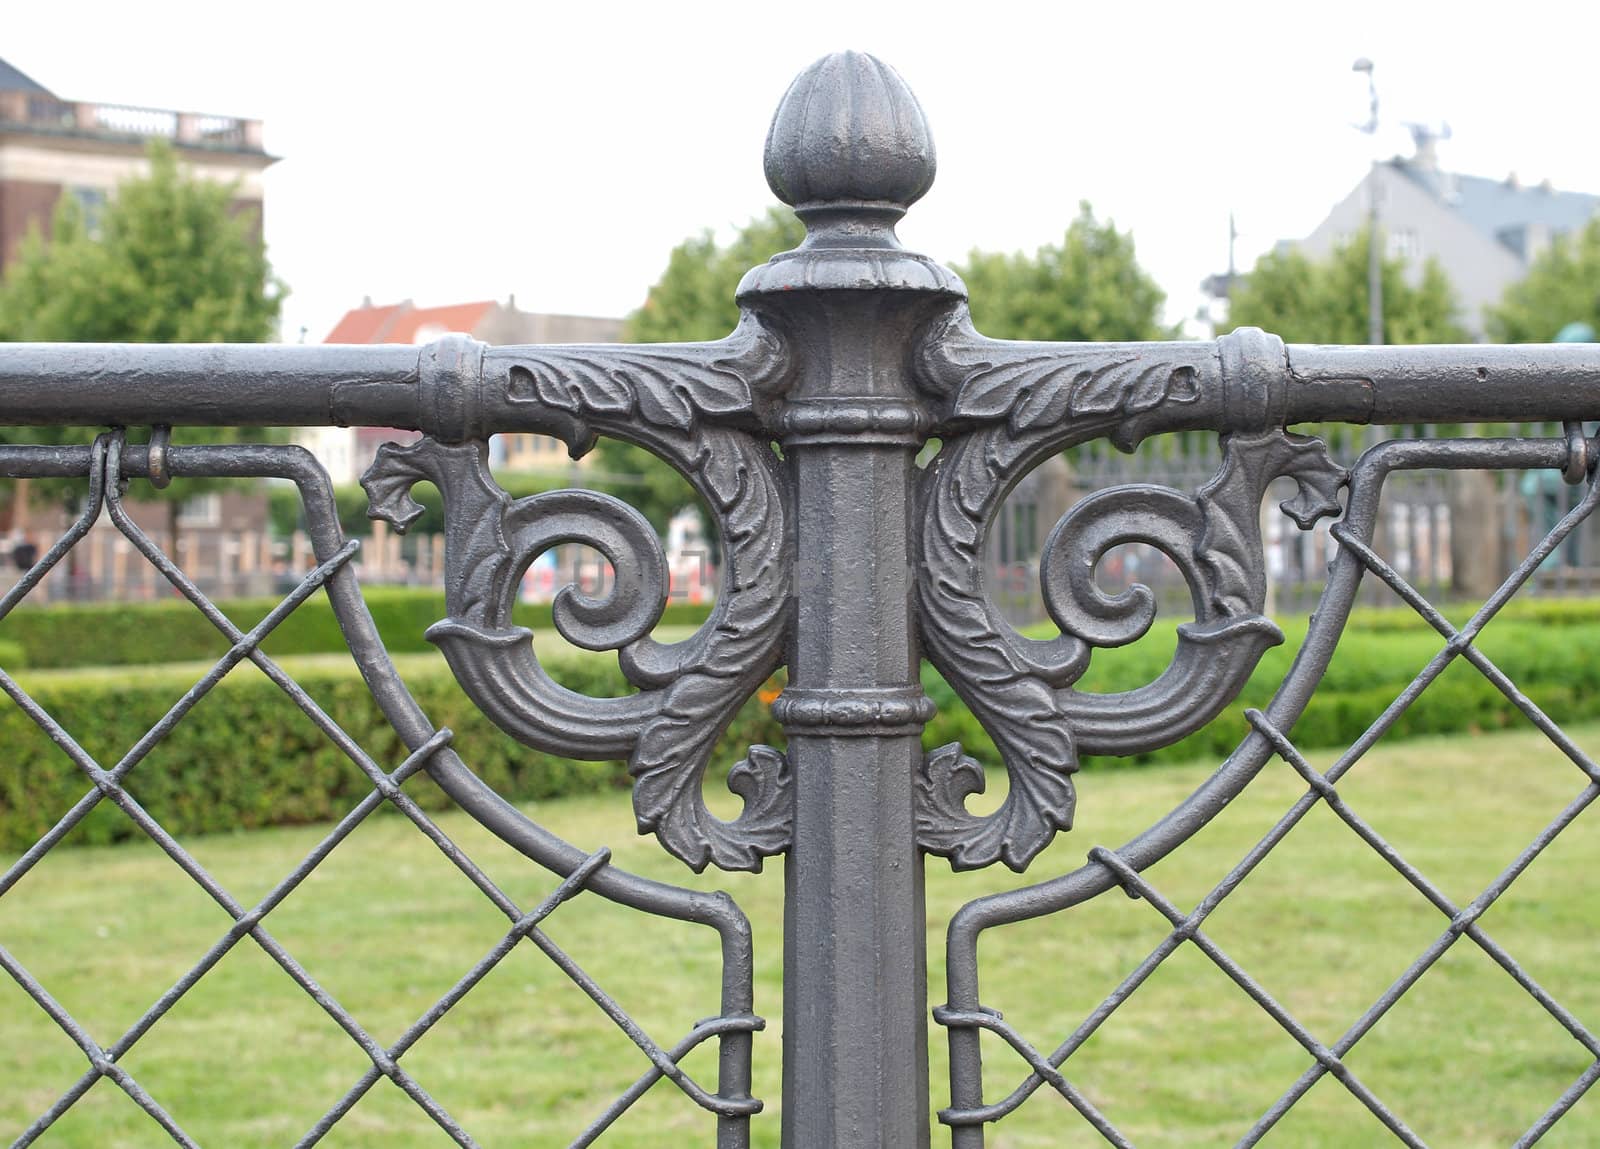 iron fence detail by Ric510